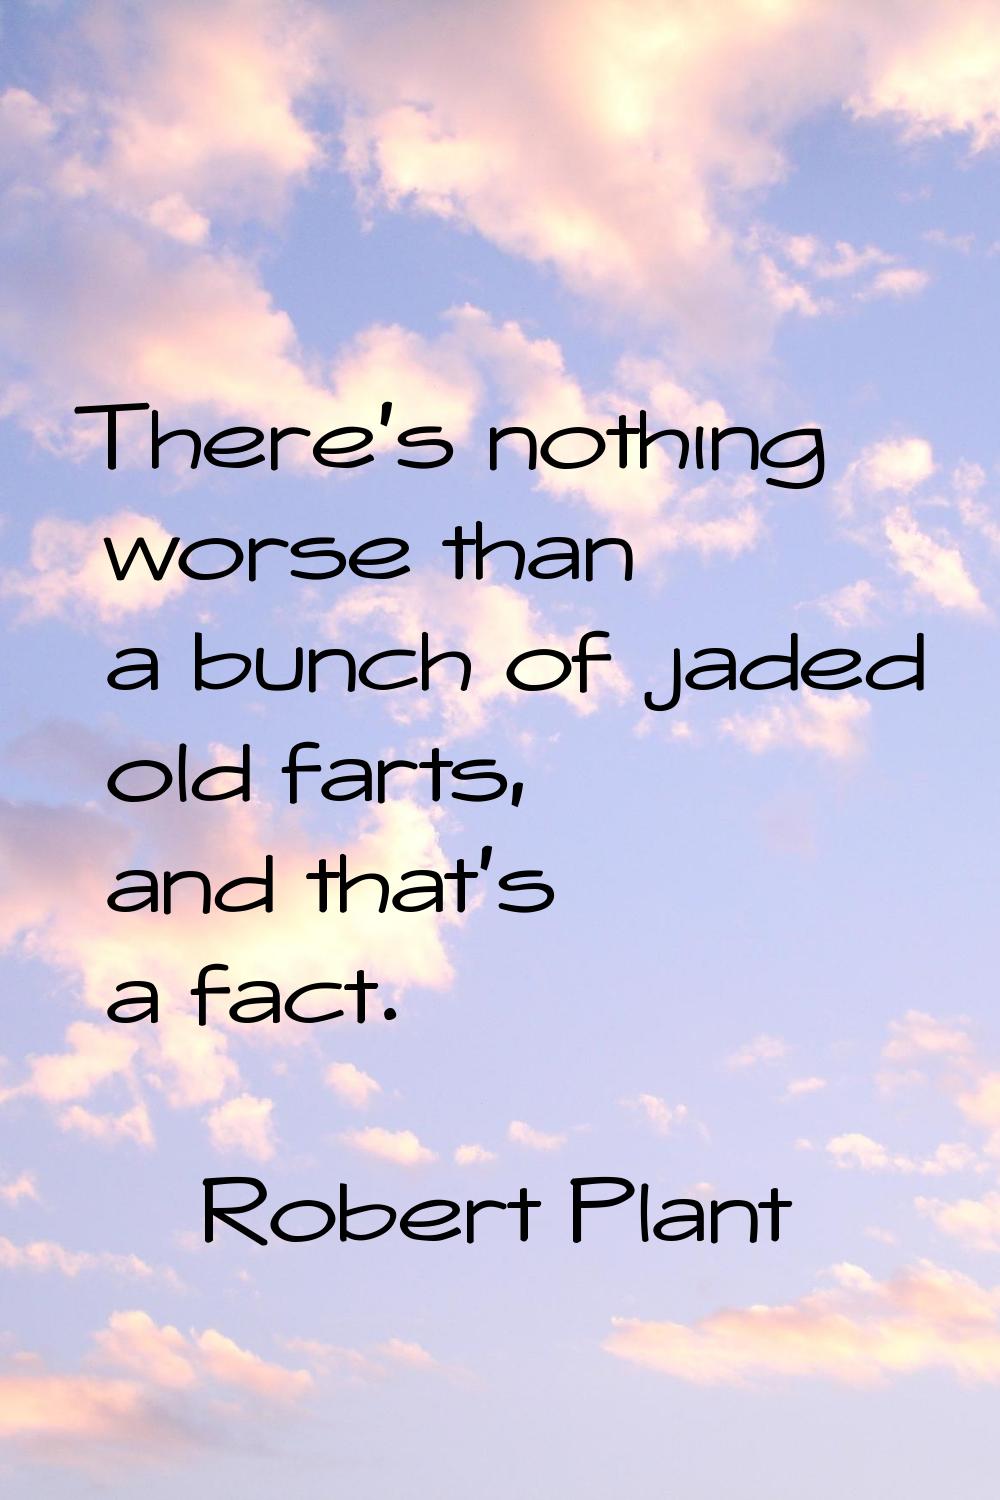 There's nothing worse than a bunch of jaded old farts, and that's a fact.